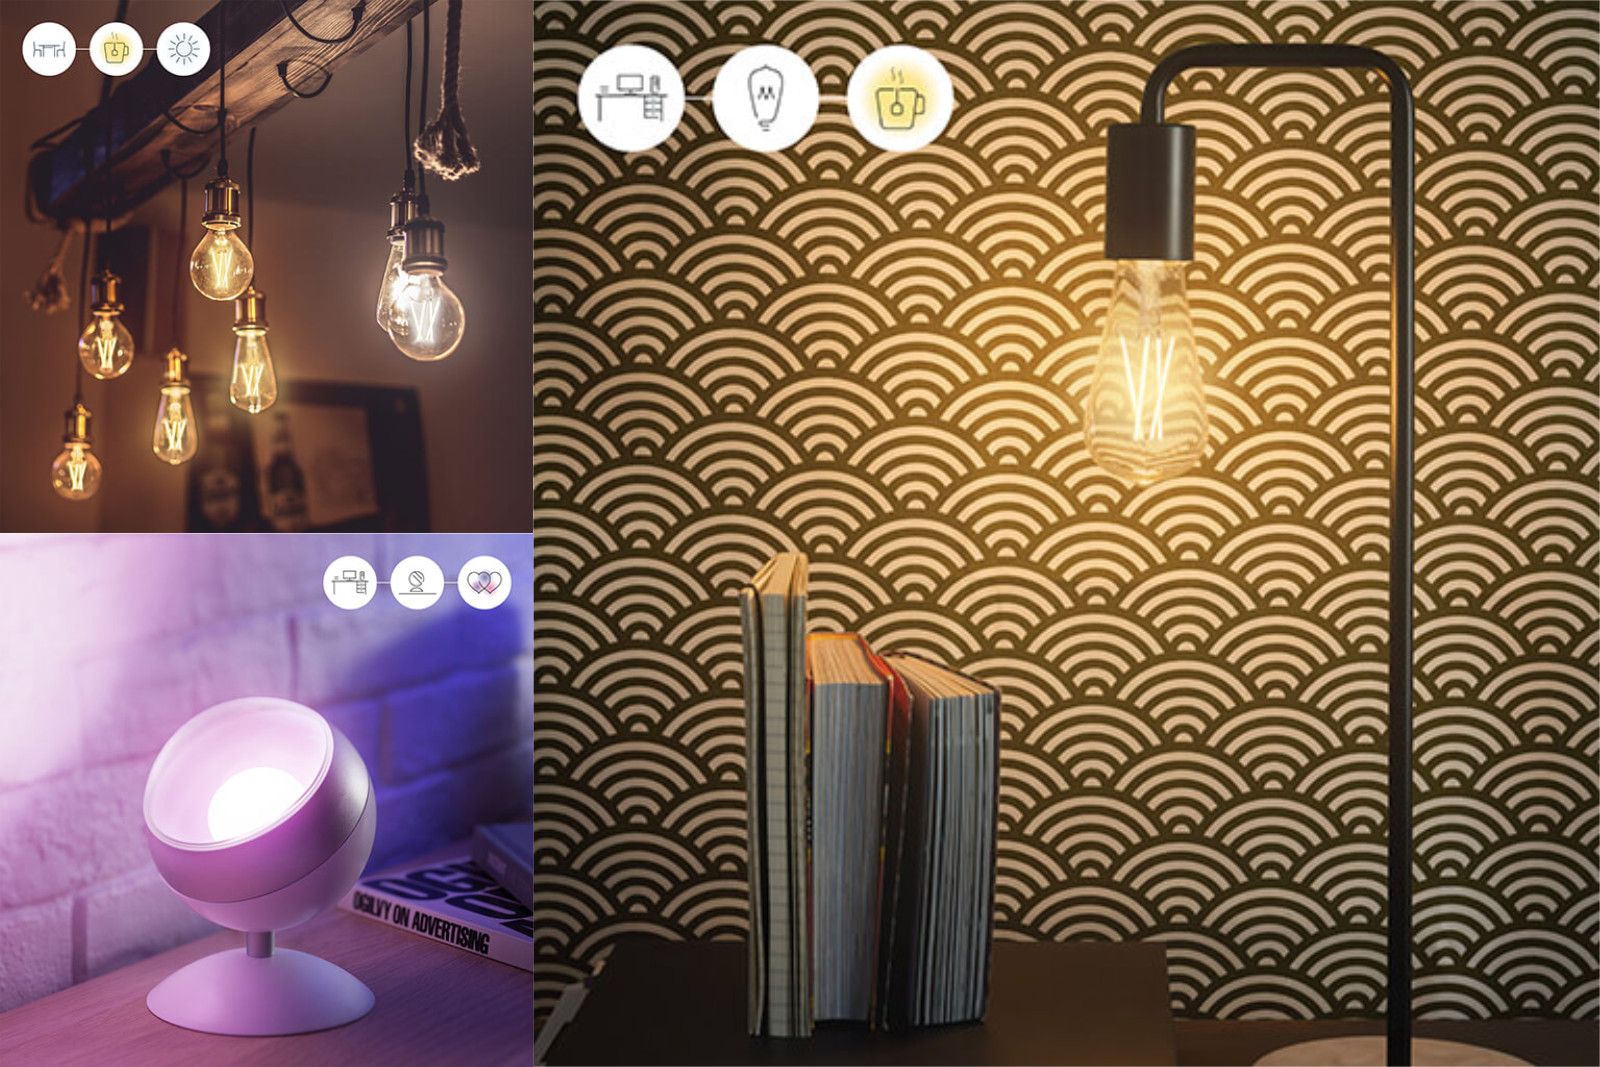 WiZ's new affordable smart lighting systems are now available across Europe photo 3